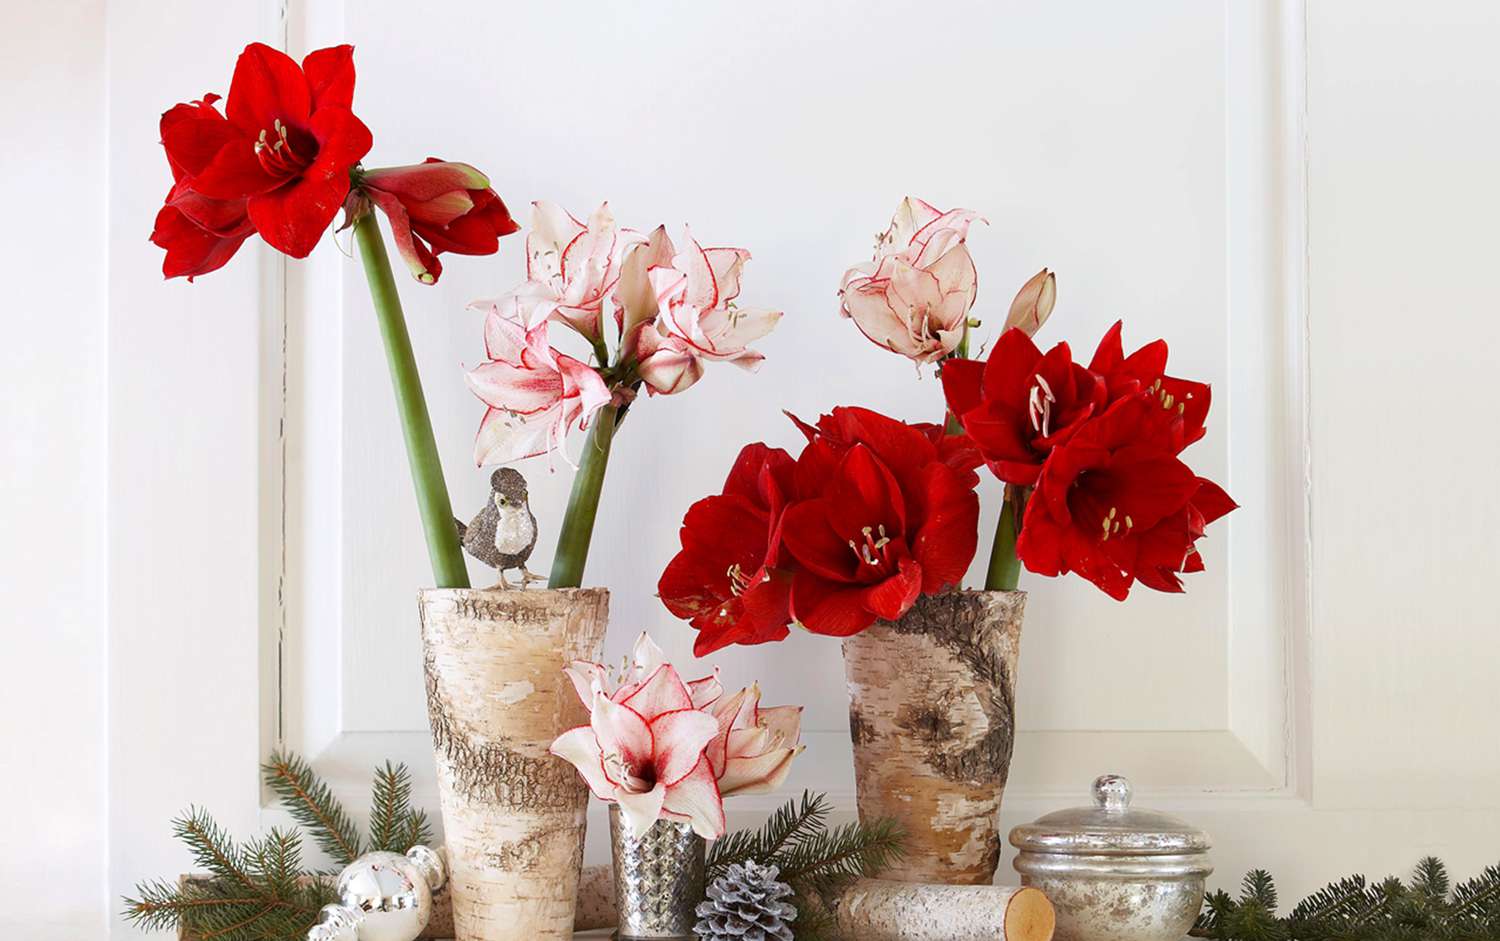 Festive Houseplants for Holiday Decorating and Gifting | Better Homes